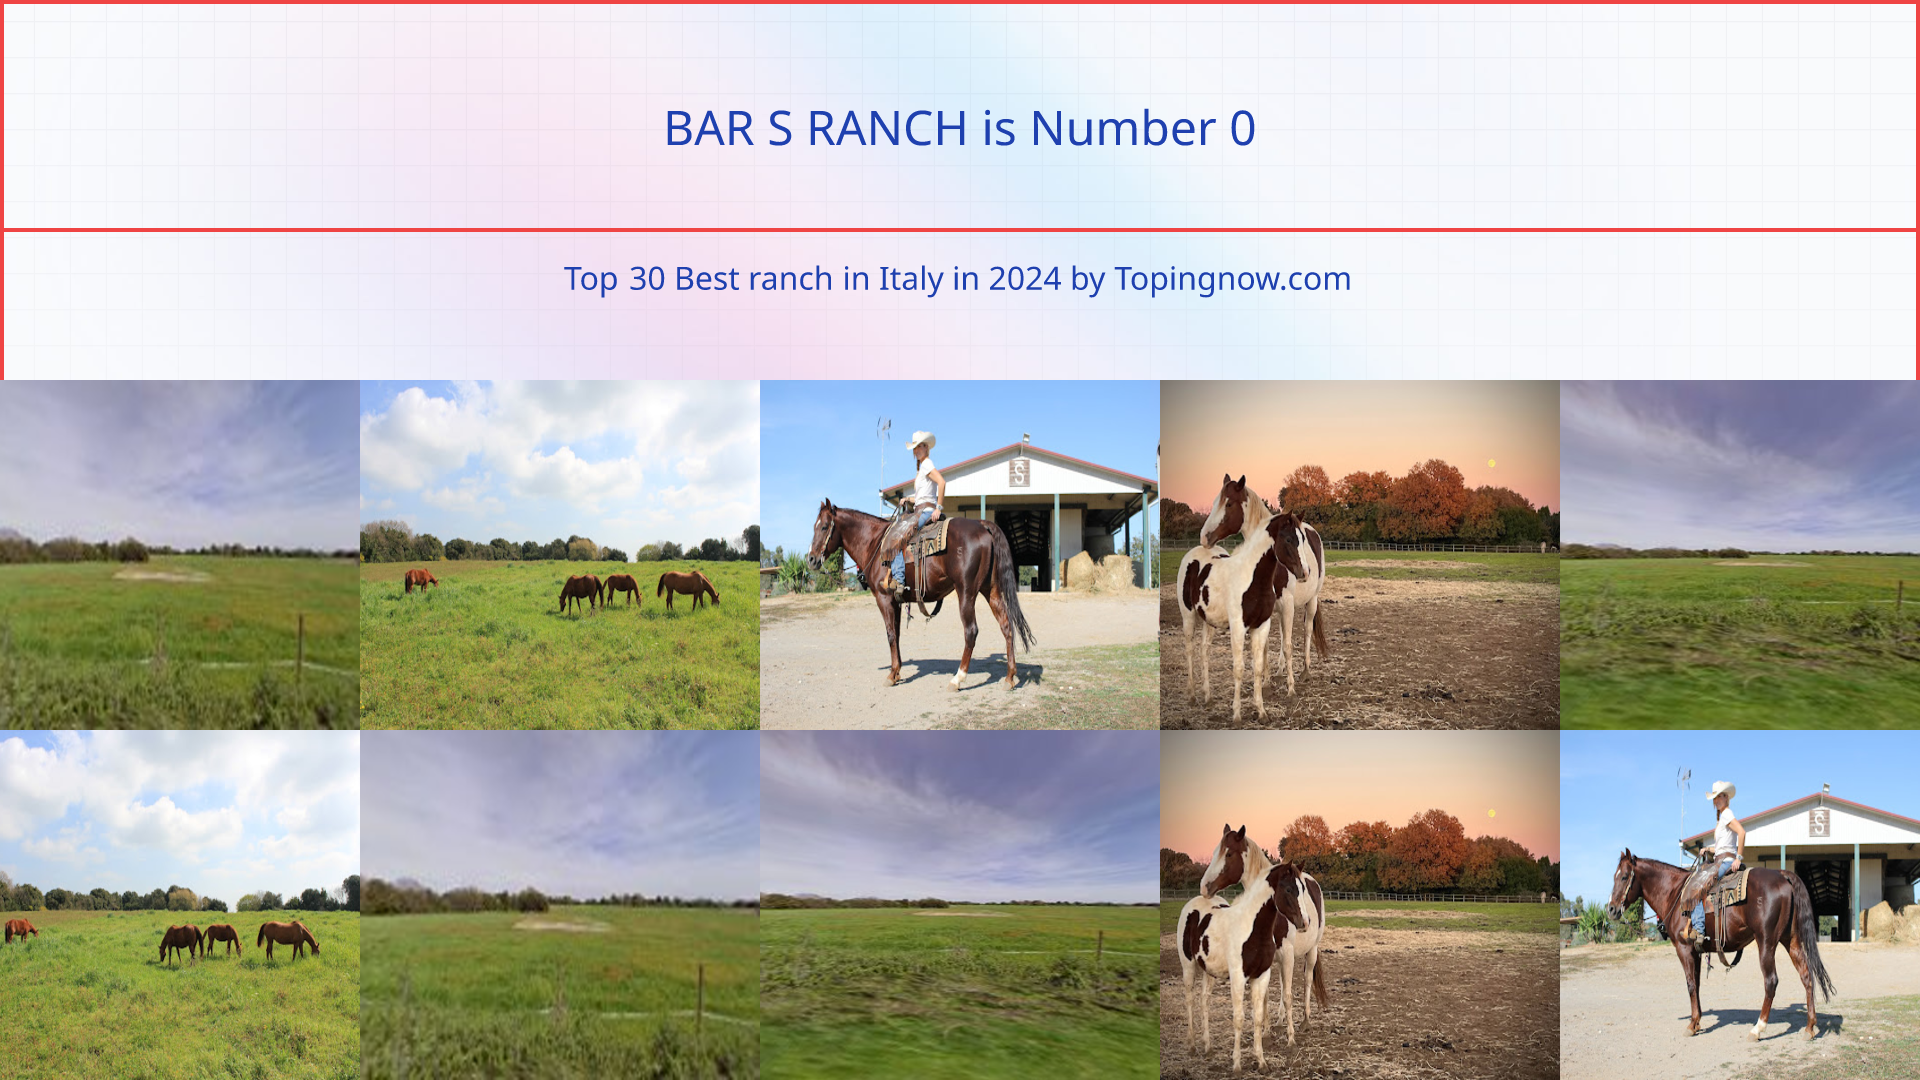 BAR S RANCH: Top 30 Best ranch in Italy in 2024